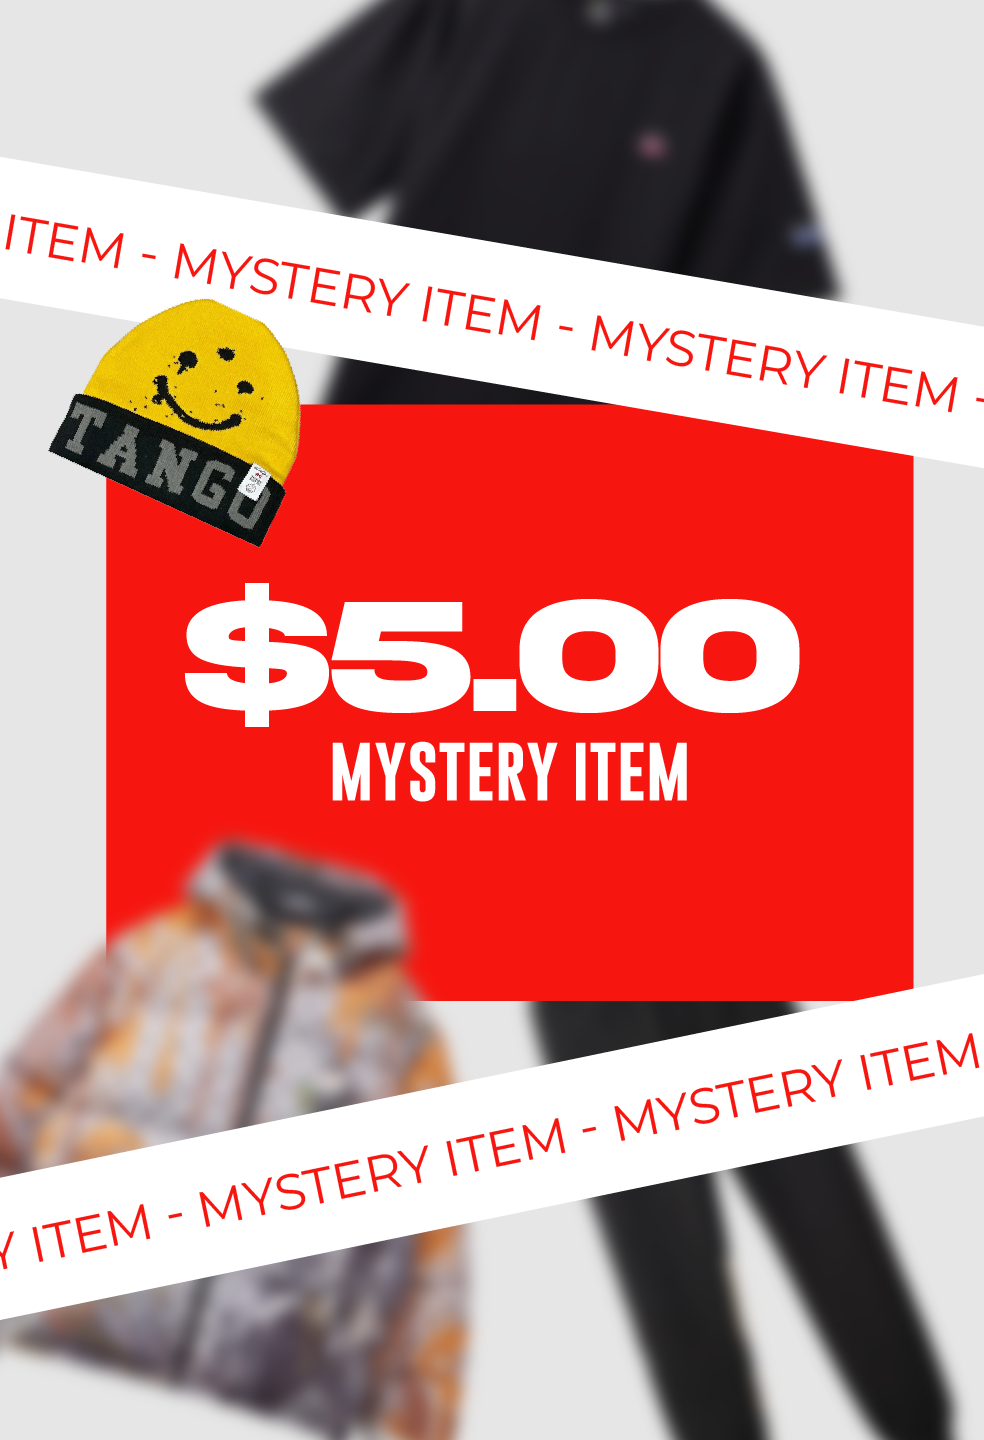 Mystery Item - Exclusive deal